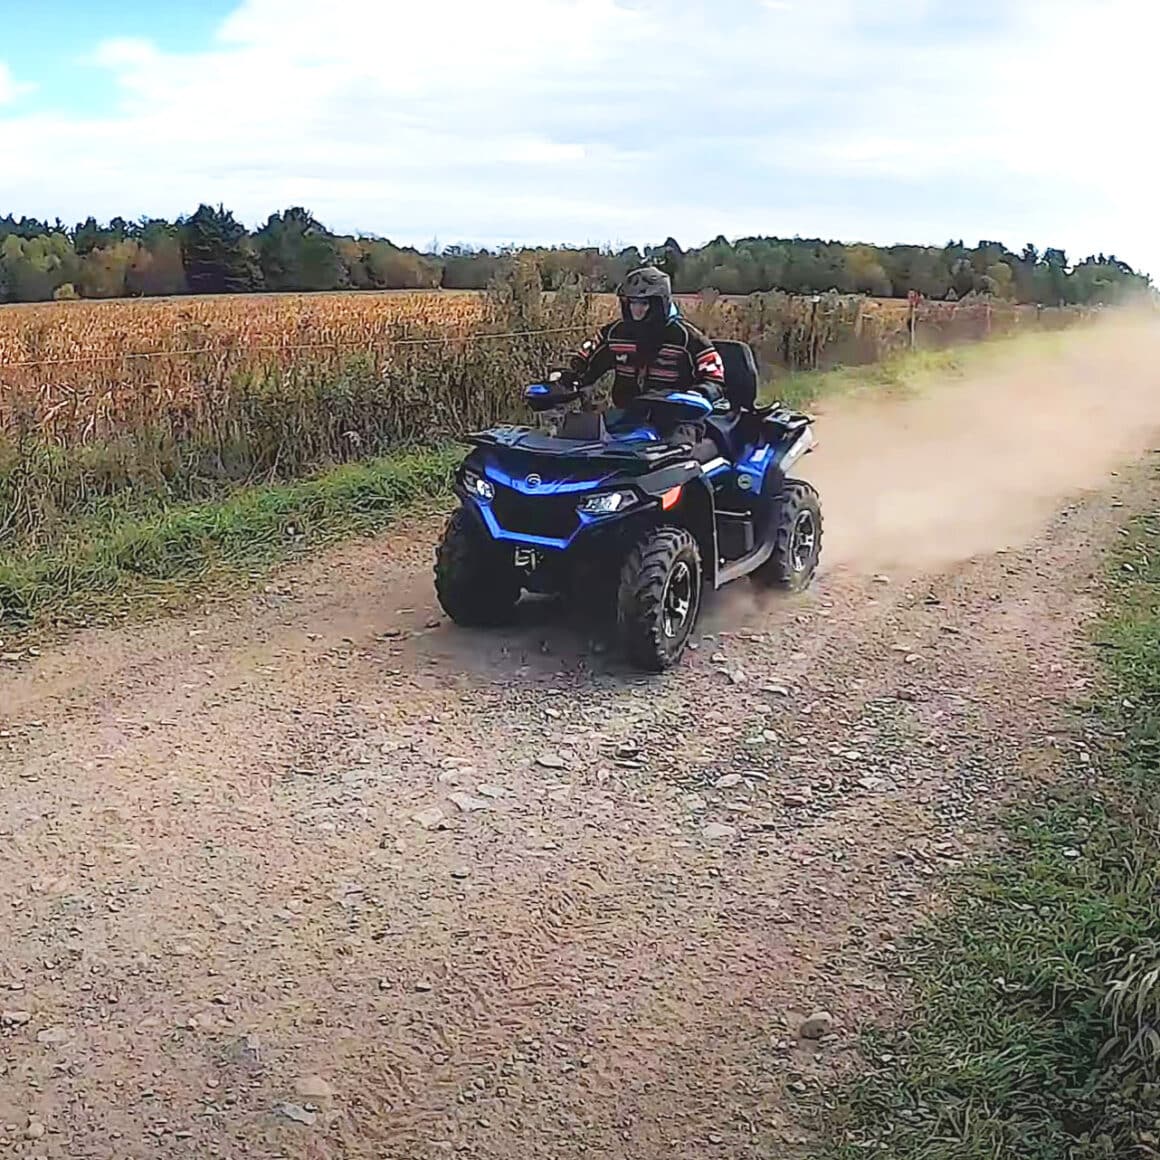 What are the ATV Trails in Upstate NY like? Everything you need to know before heading upstate to ride. 12 ATV Trails 2 ADK